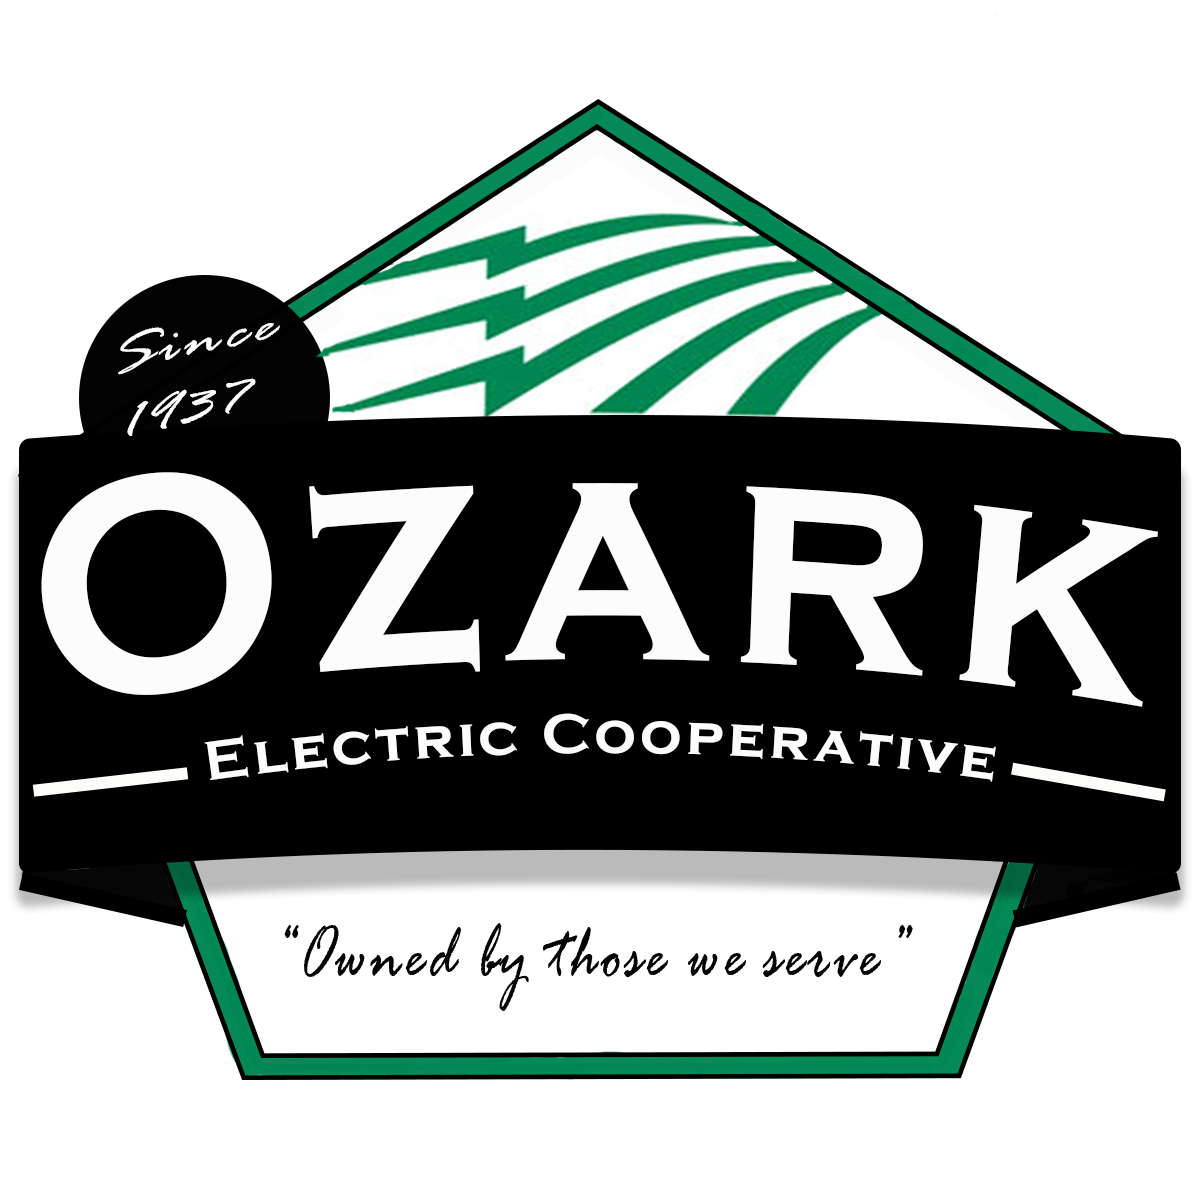 ozark-electric-coop-asks-for-customers-to-conserve-energy-krzk-106-3